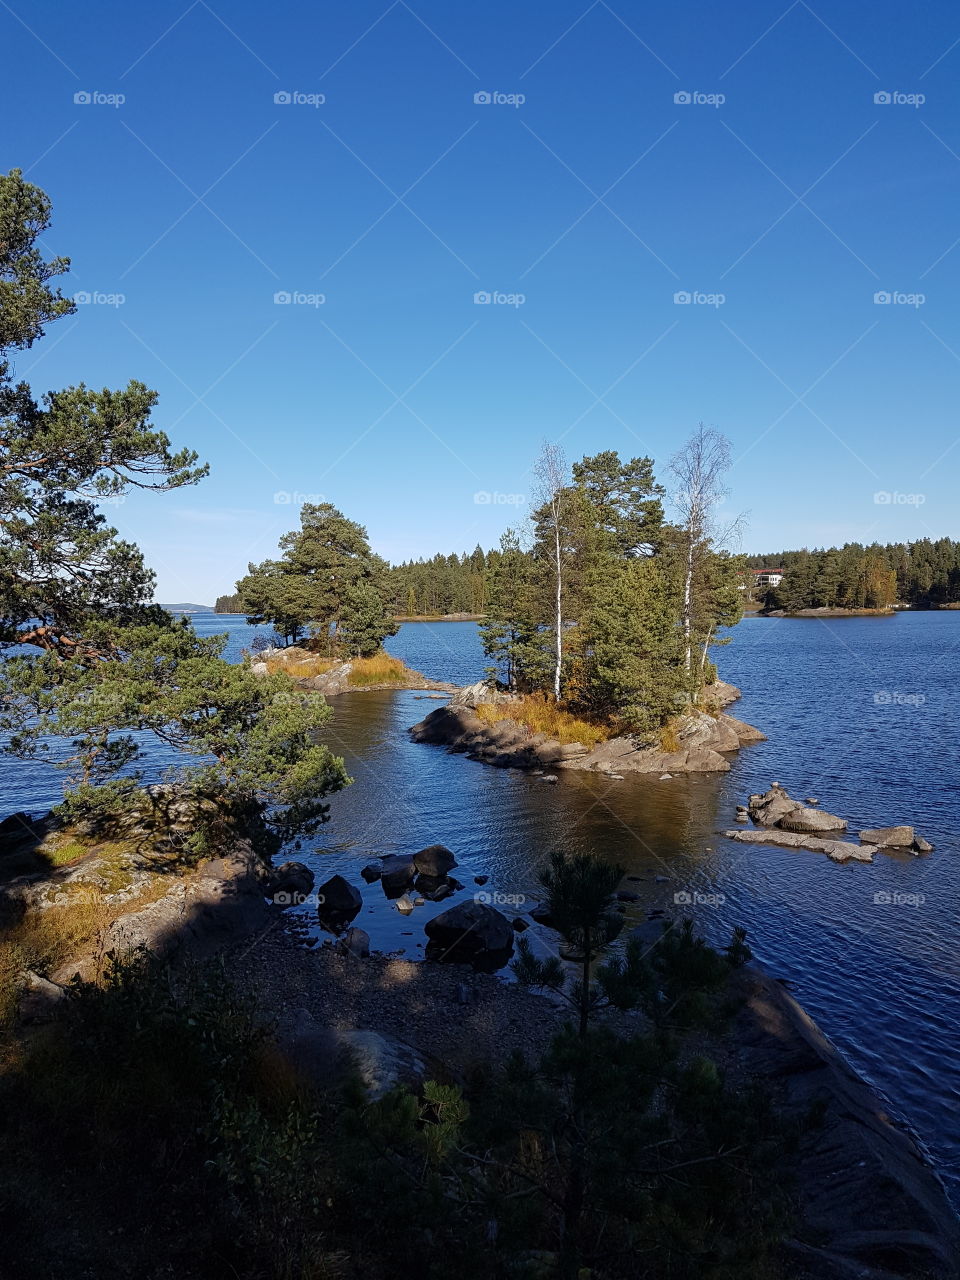 One of Impressing Norway Lake and Islands